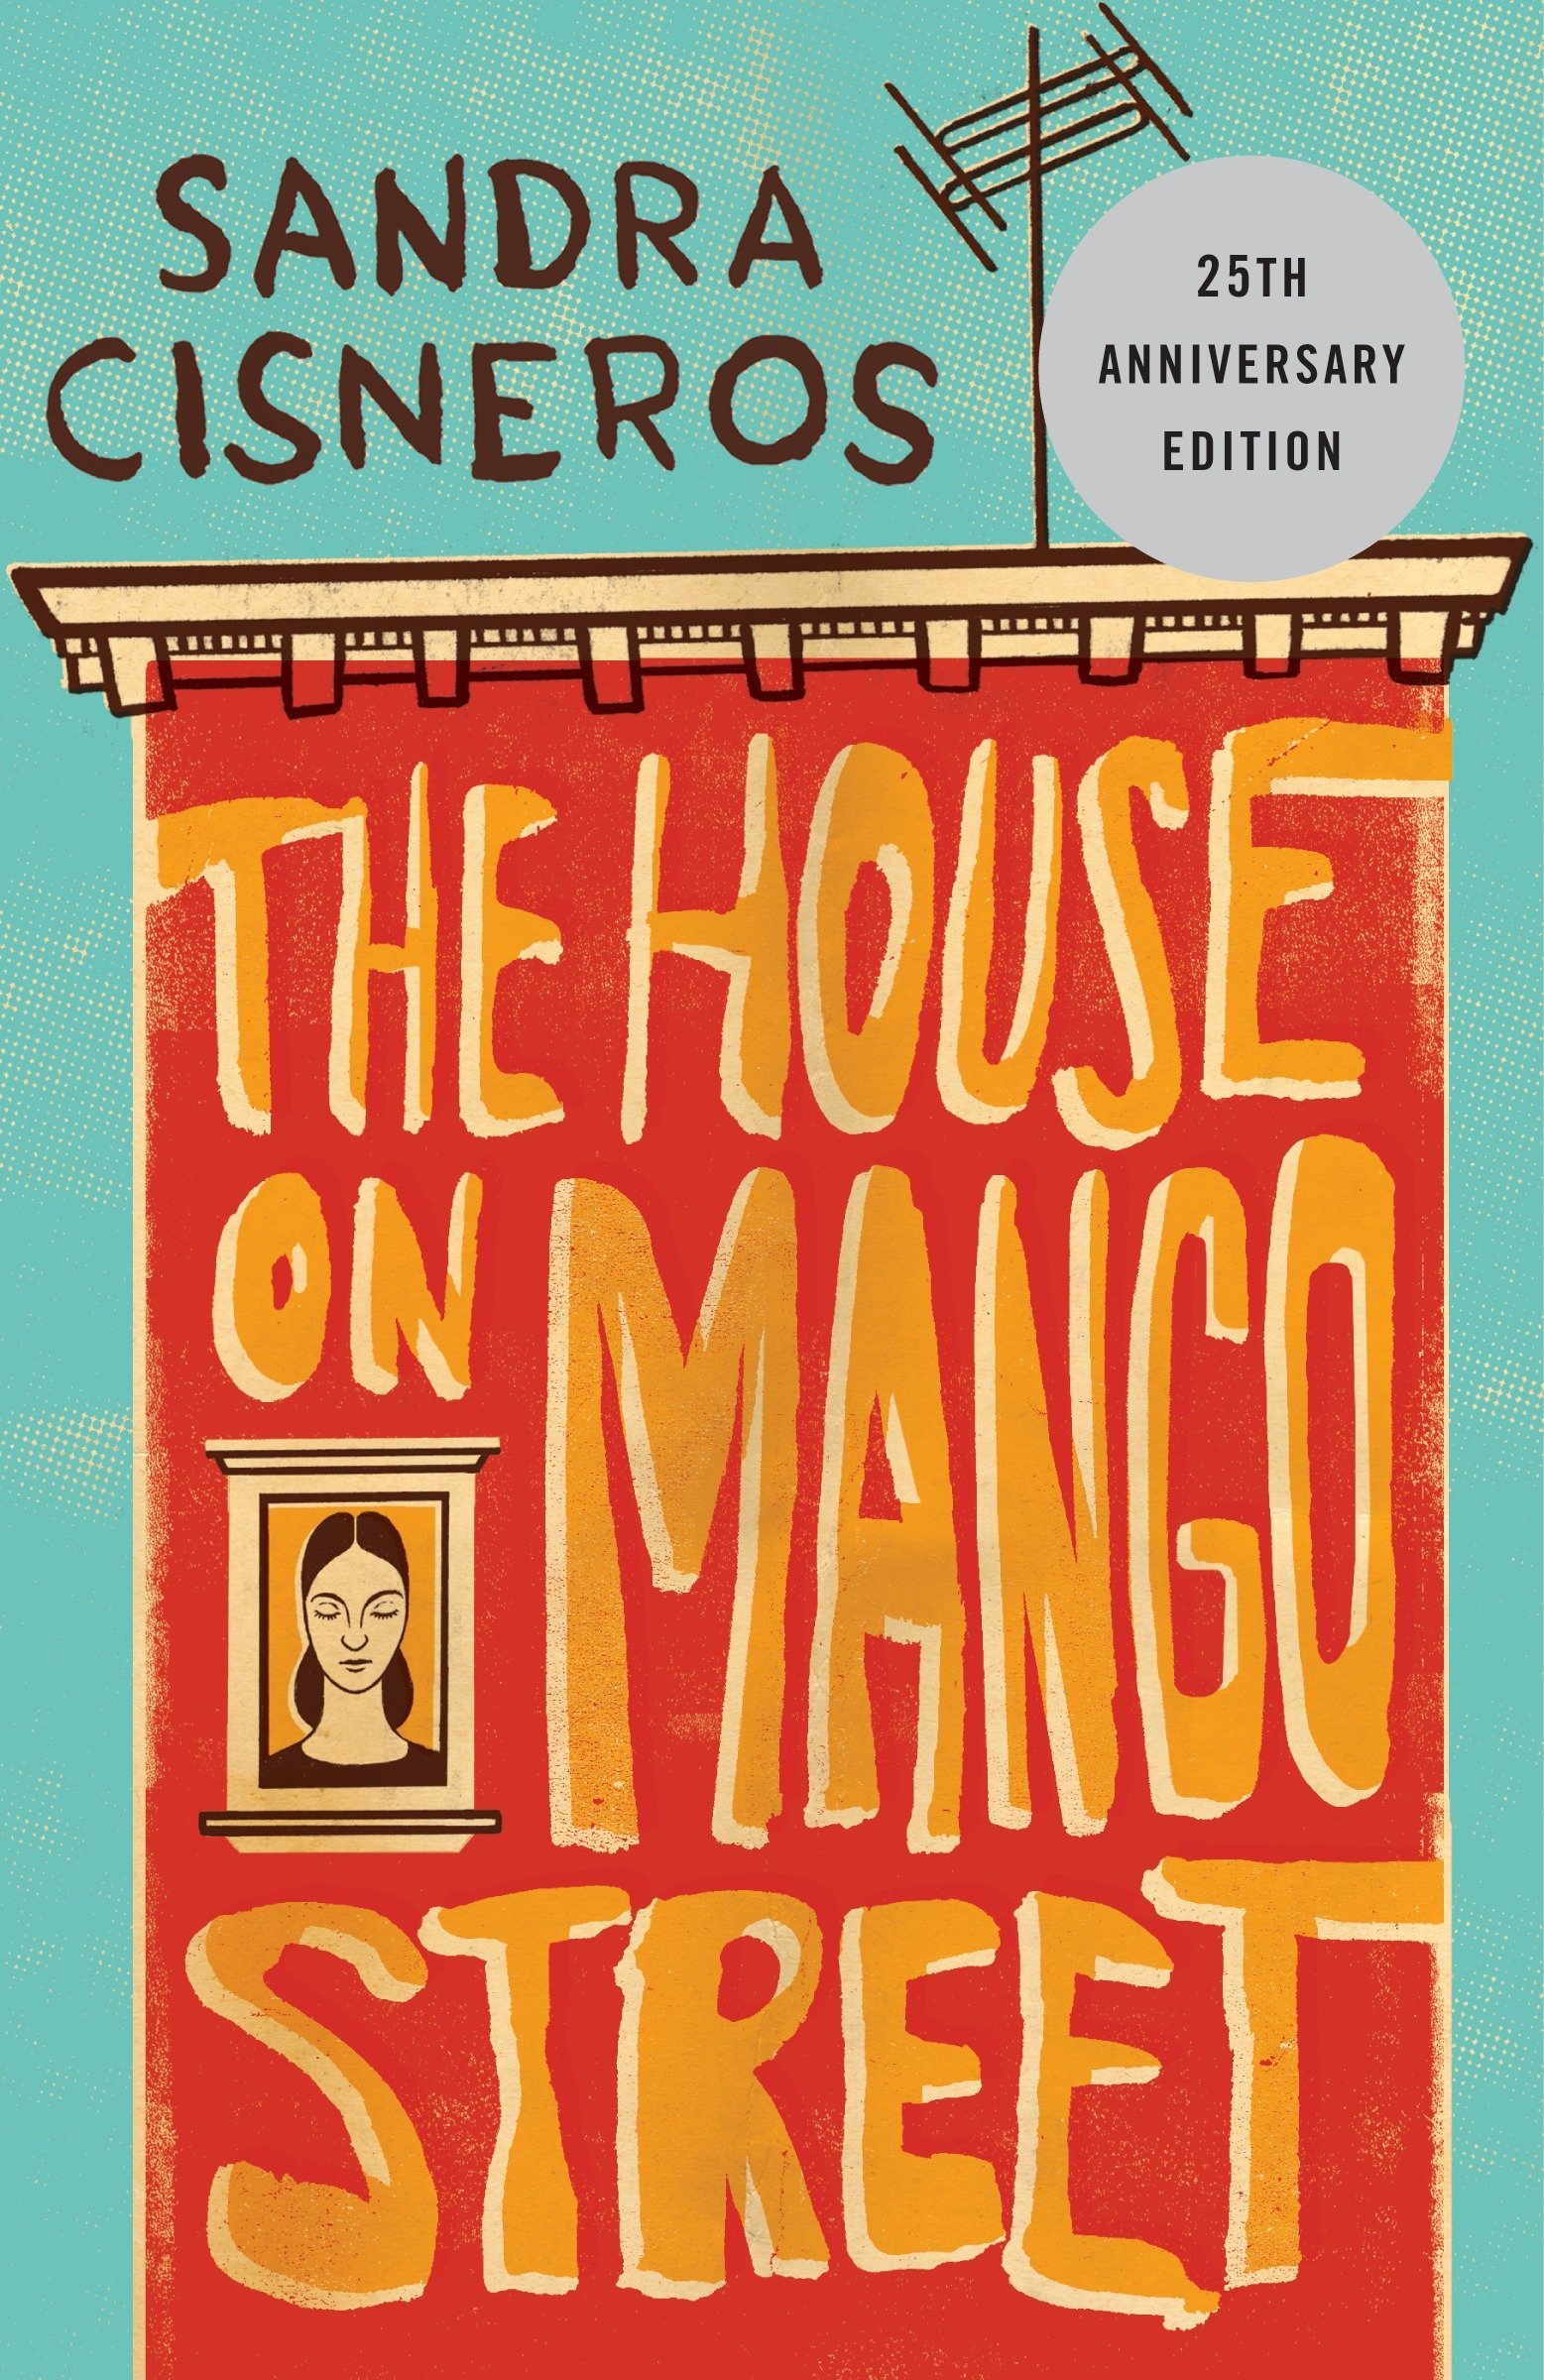 25th anniversary cover image of House on Mango Street